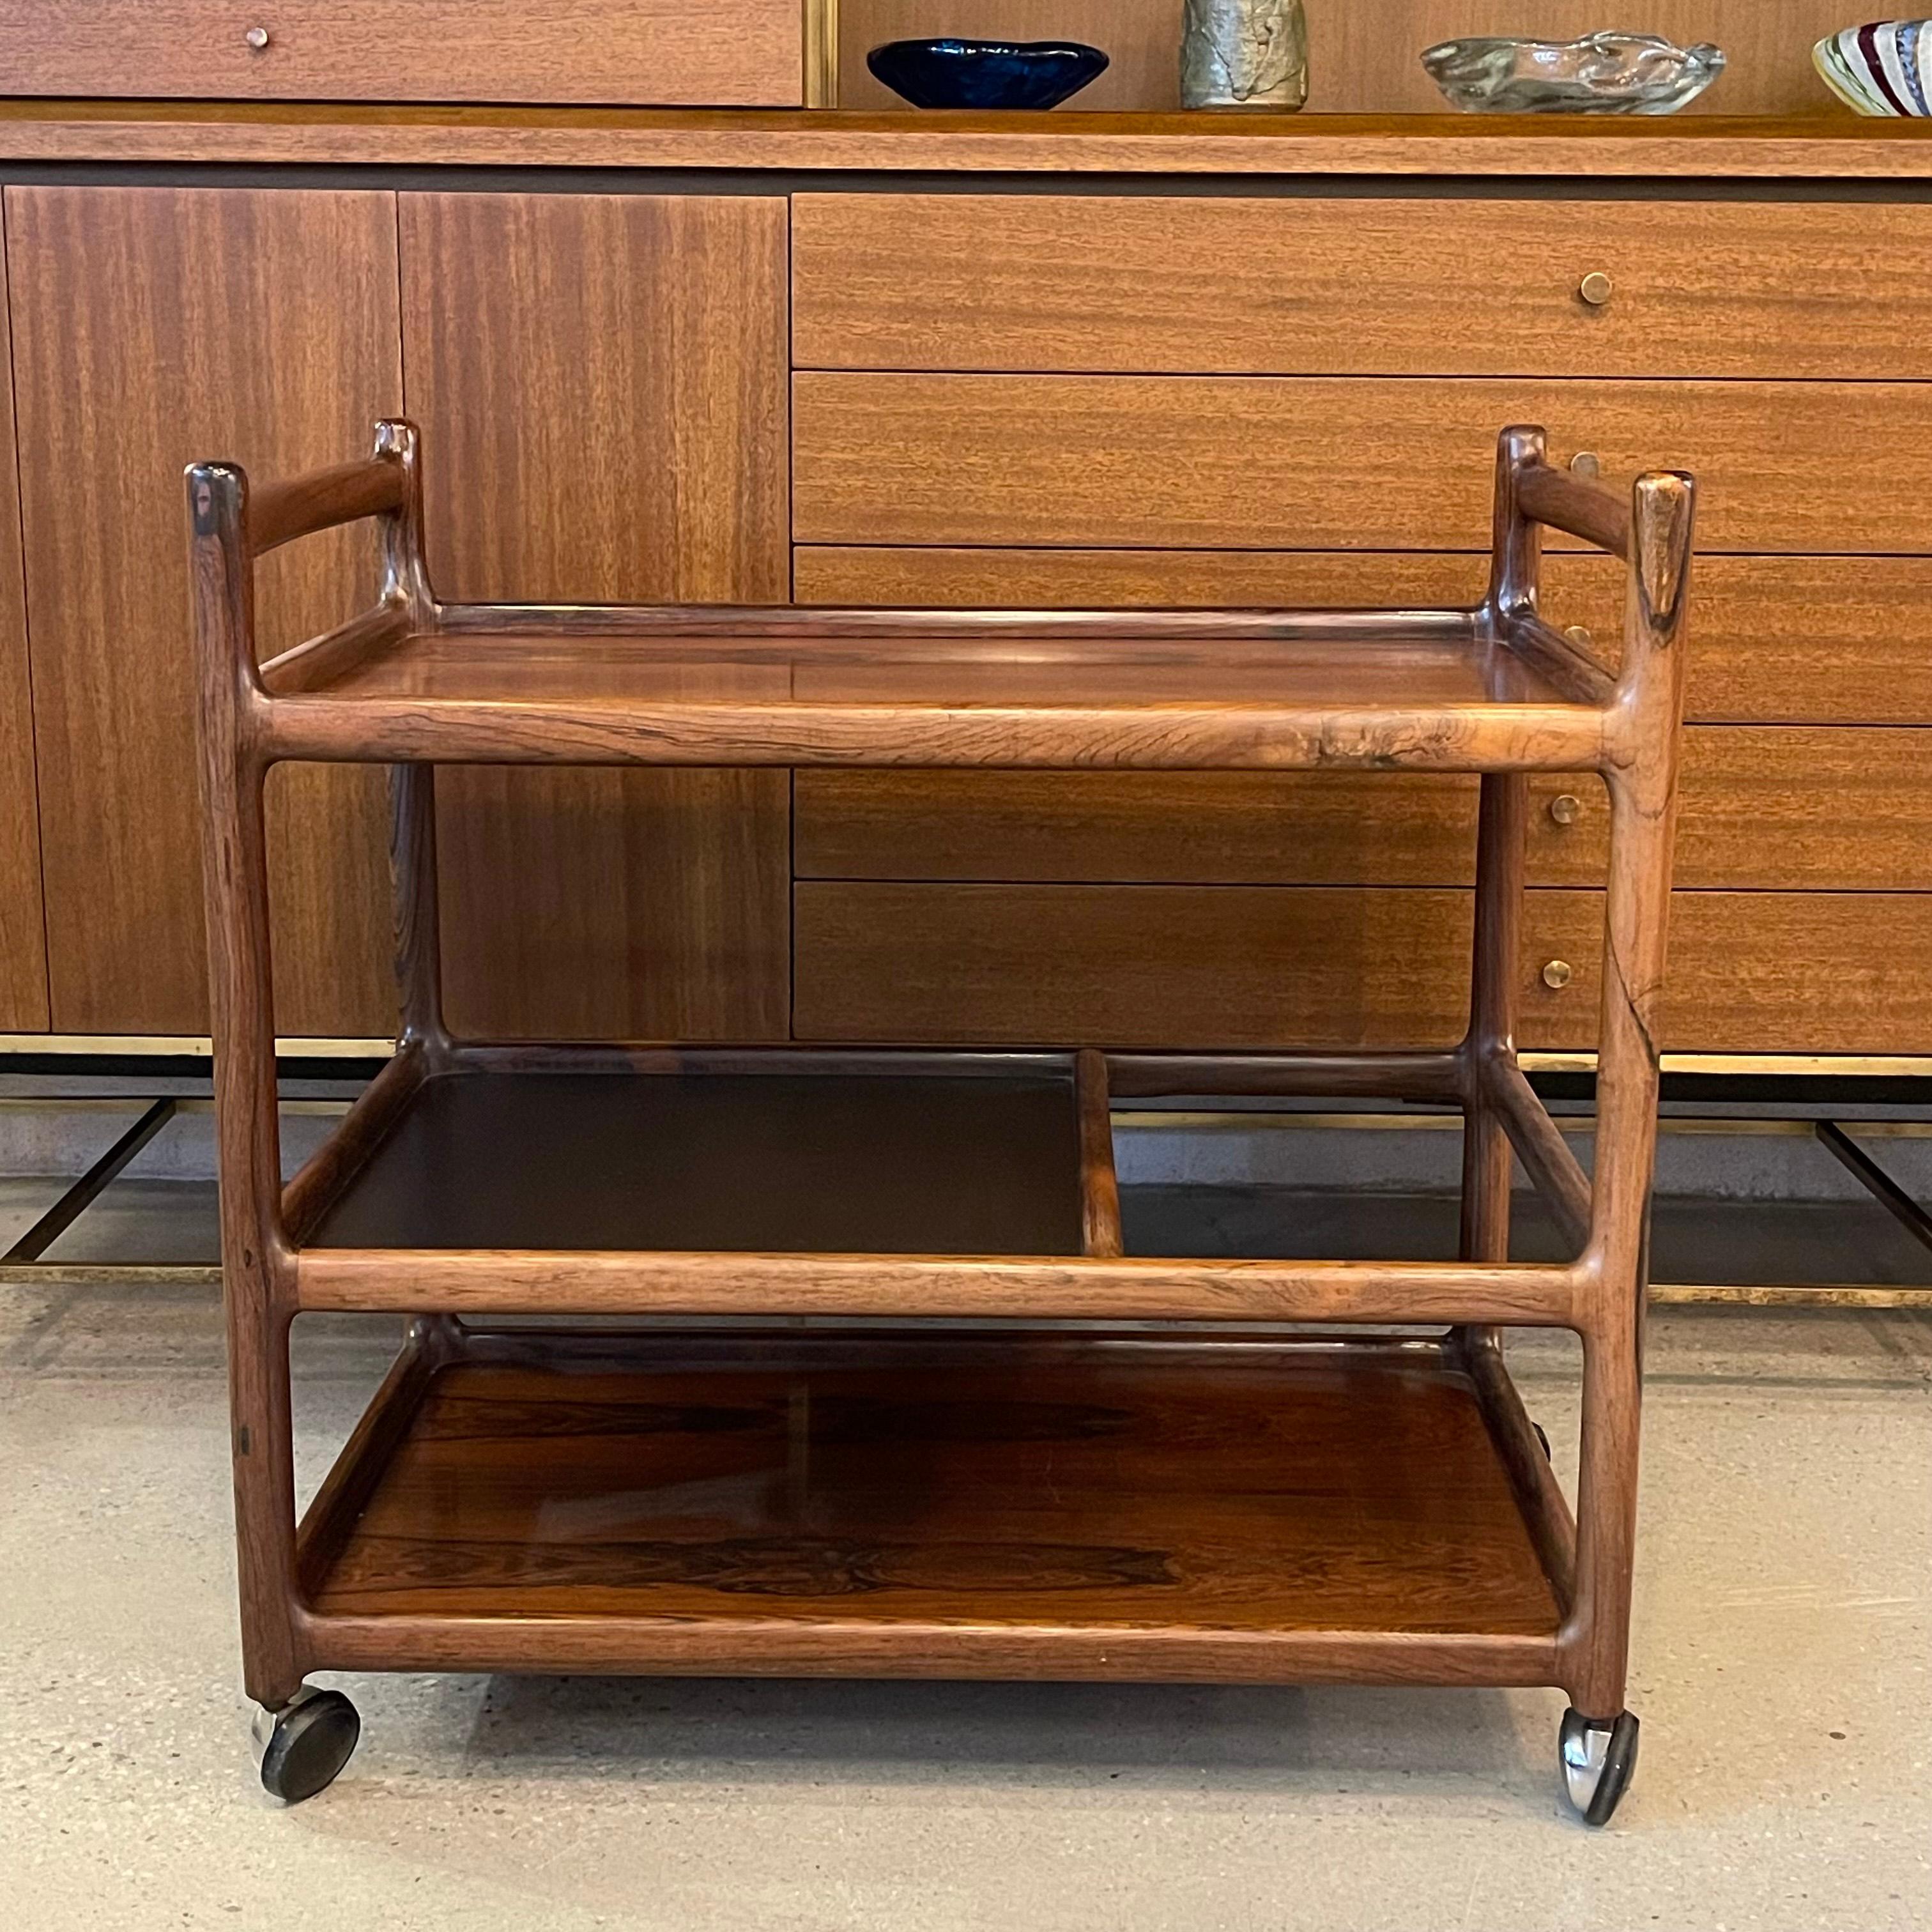 Elegant, Danish modern, rosewood bar, serving cart by Johannes Andersen for CFC Silkeborg features 3 tiers to accommodate glasses and bottles. The middle tier has a black laminate top that is wipeable. The chrome casters and handles make it easy to